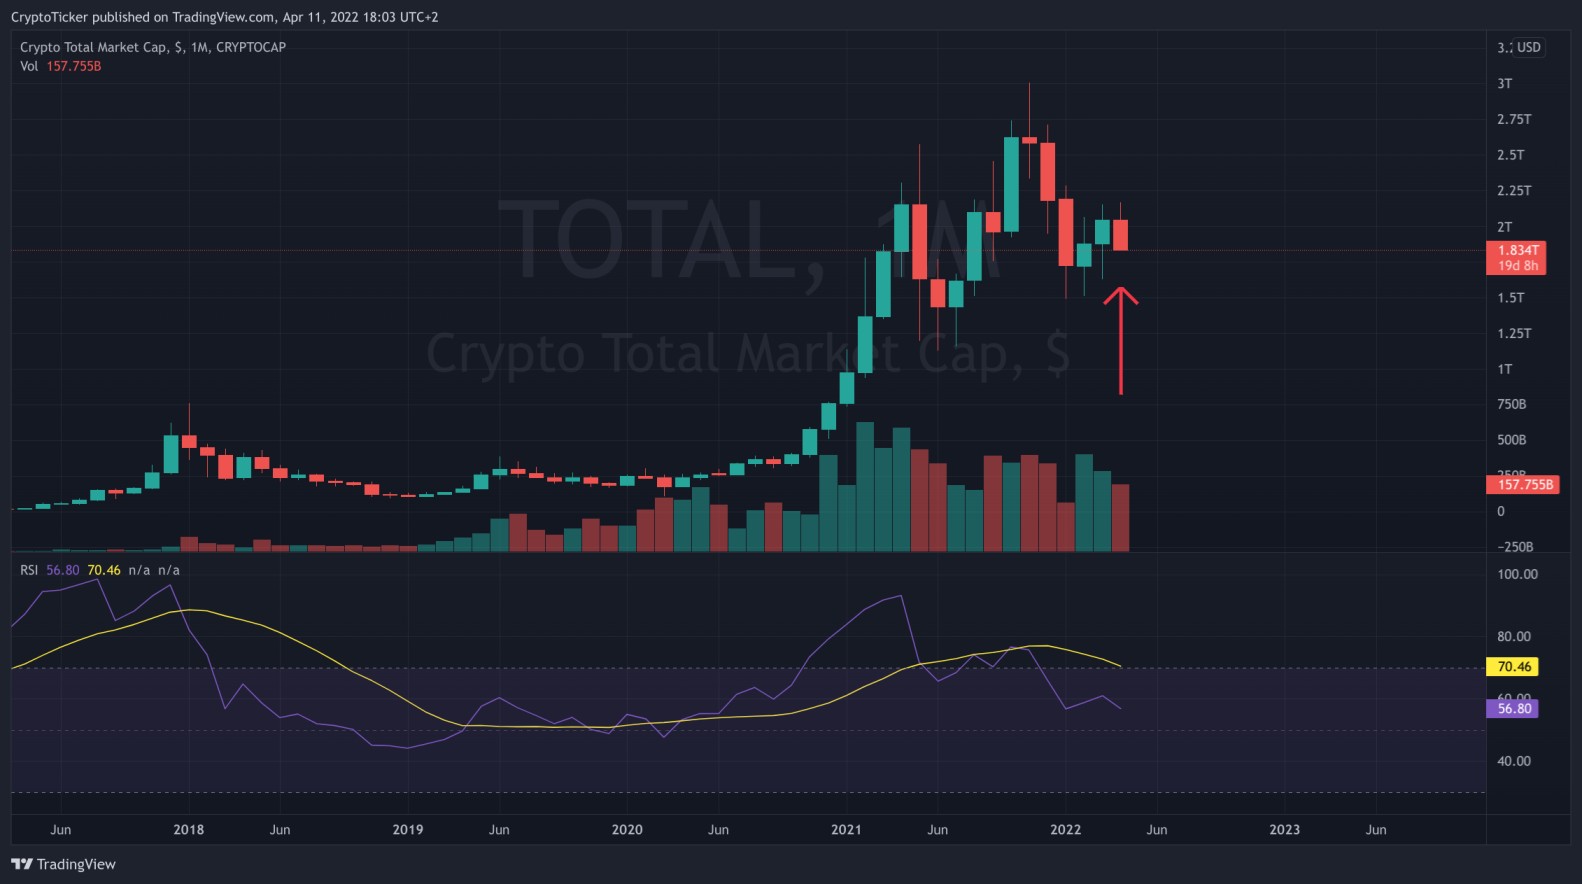 Total Crypto Market cap in USD - Why is the crypto market crashing